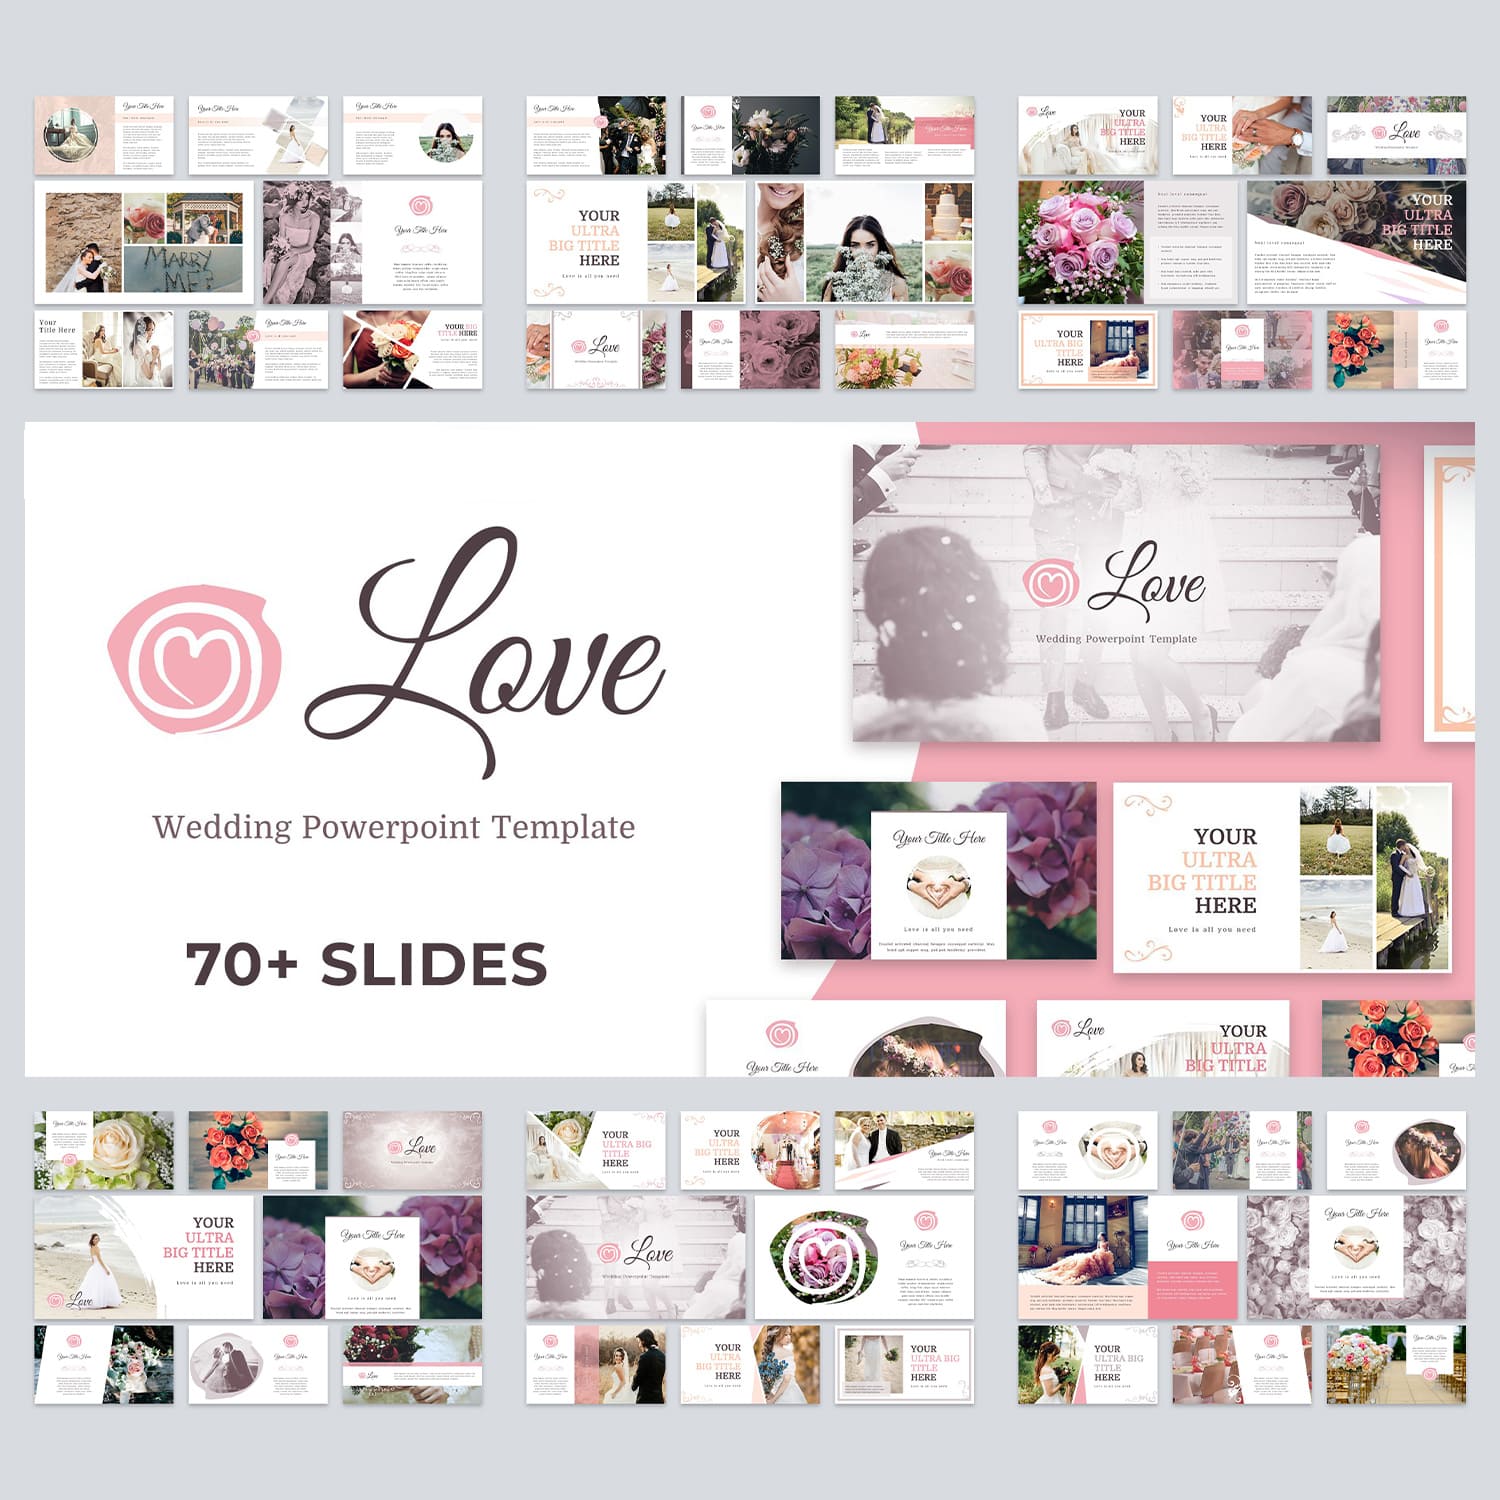 Love is a wedding template but can be used for any type of presentation.